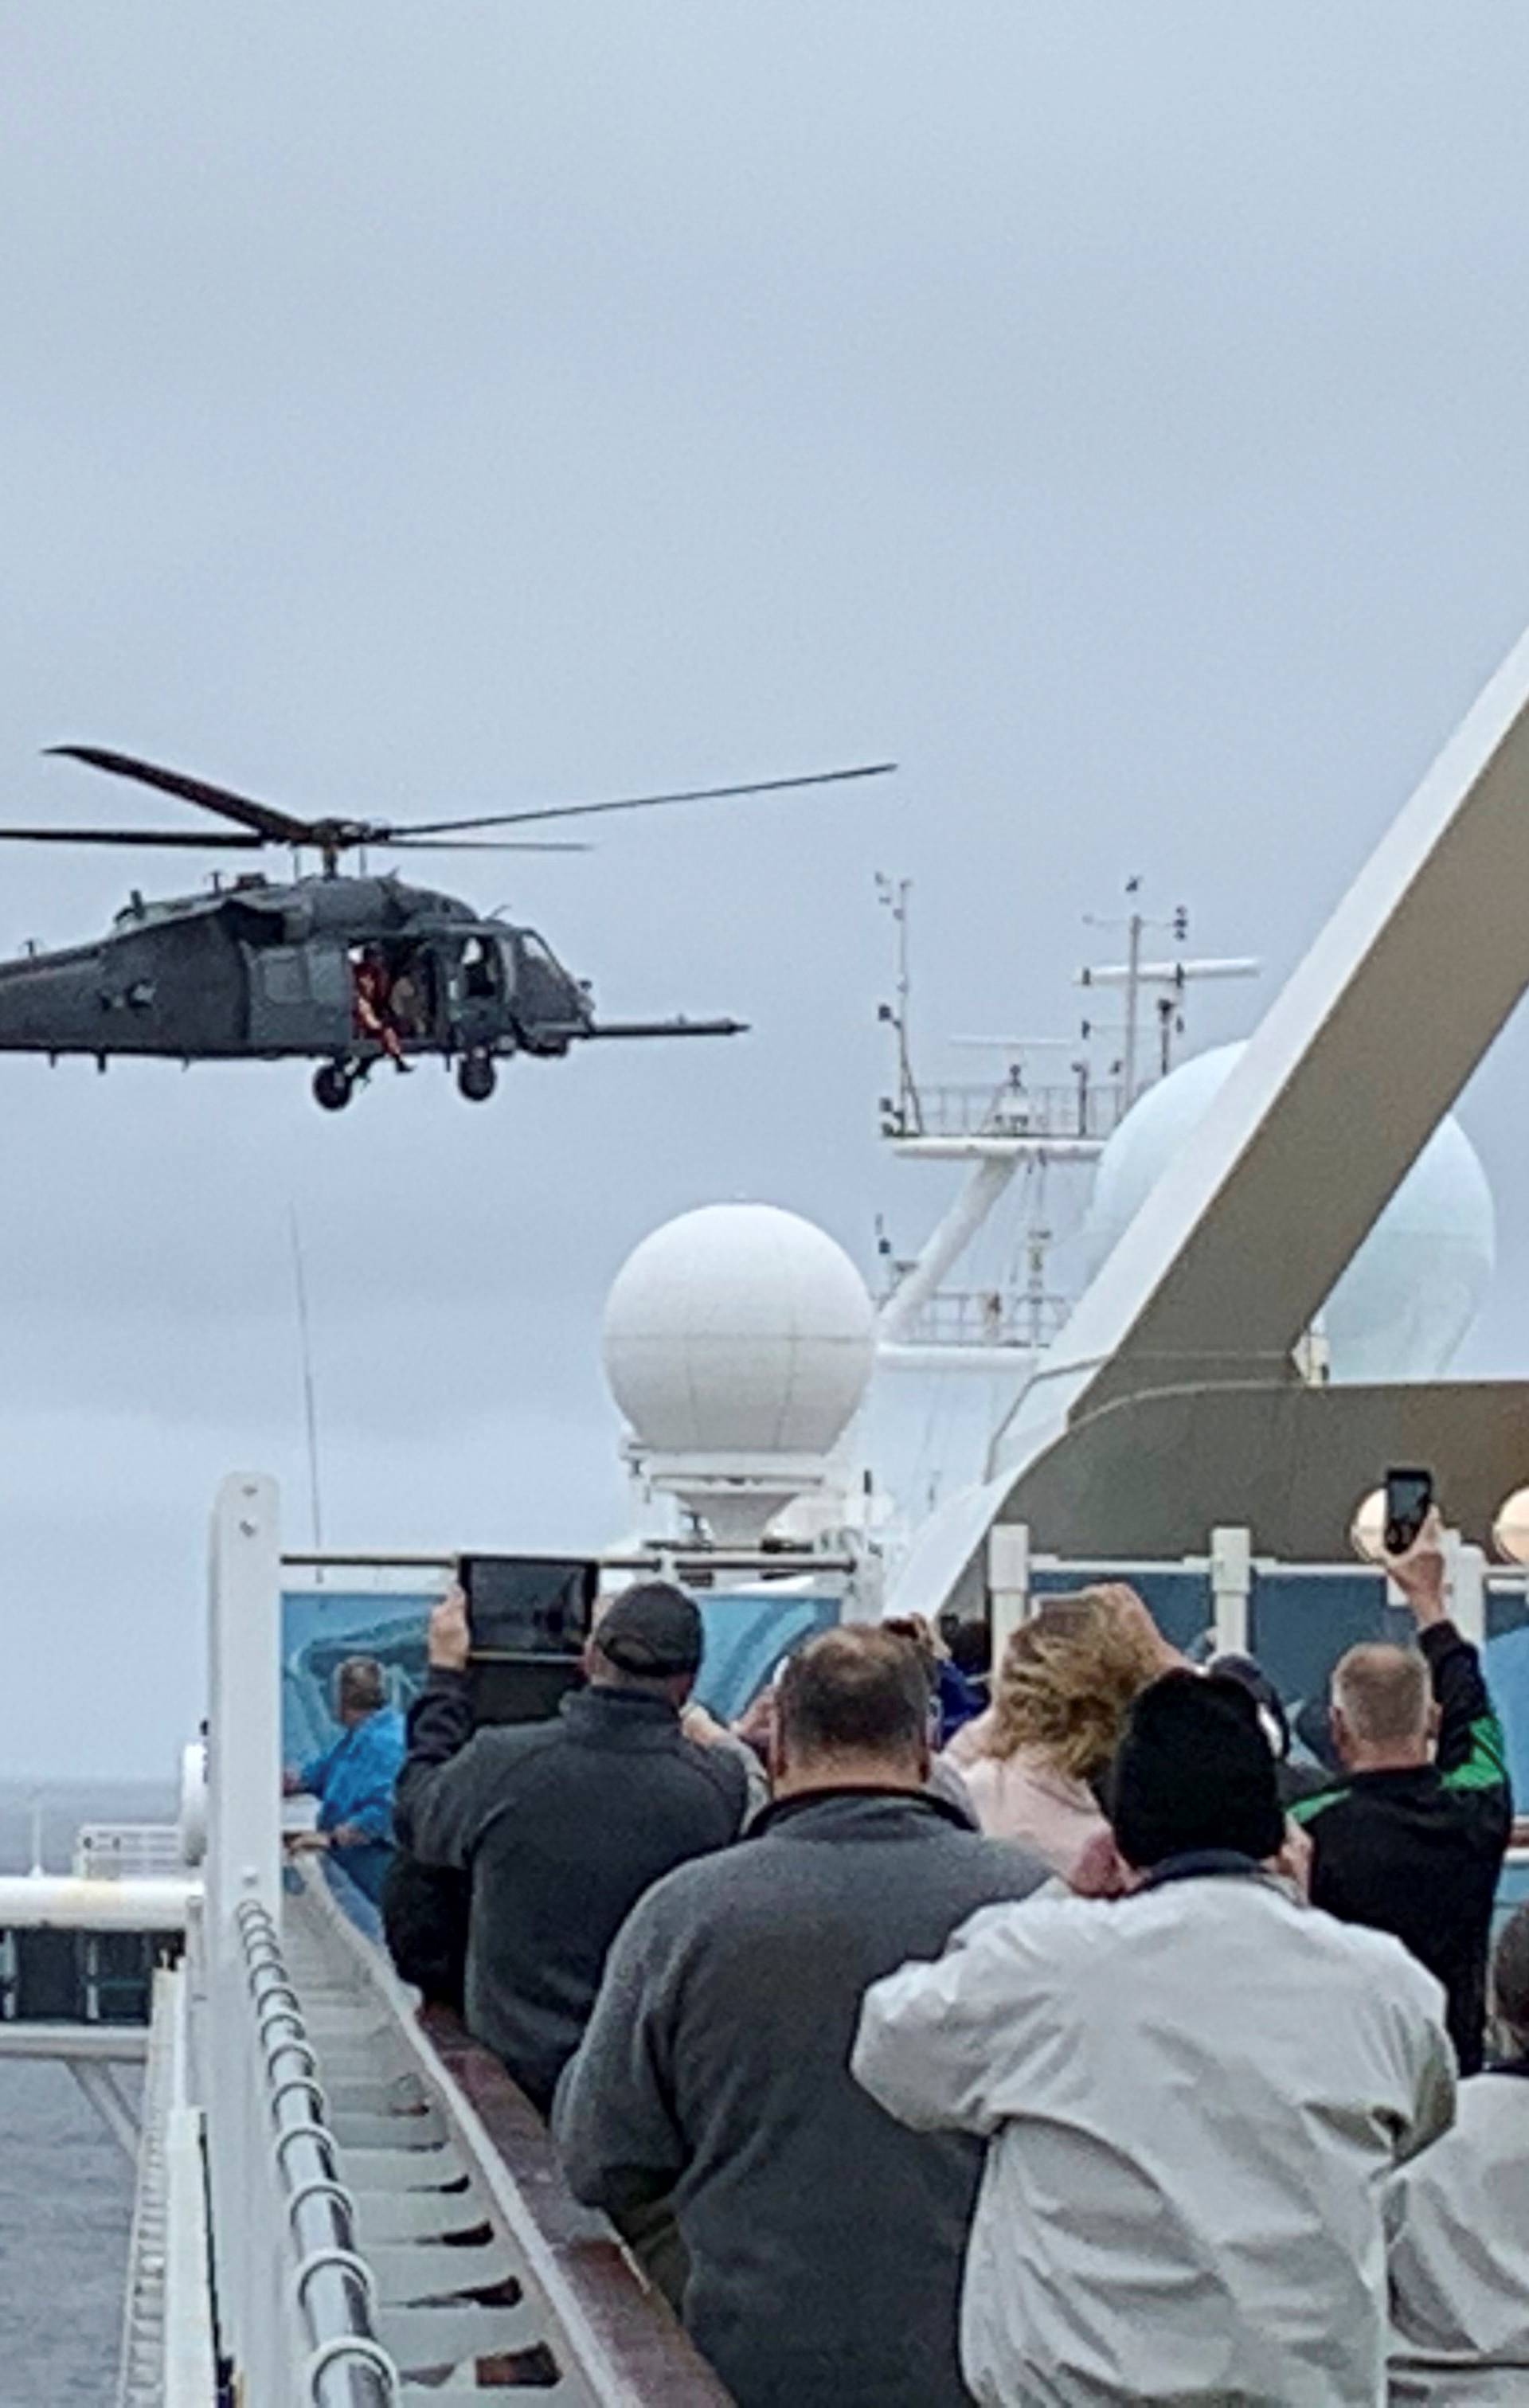 Passengers on board the Grand Princess cruise ship off San Francisco watch while a U.S. military helicopter hovers above the deck